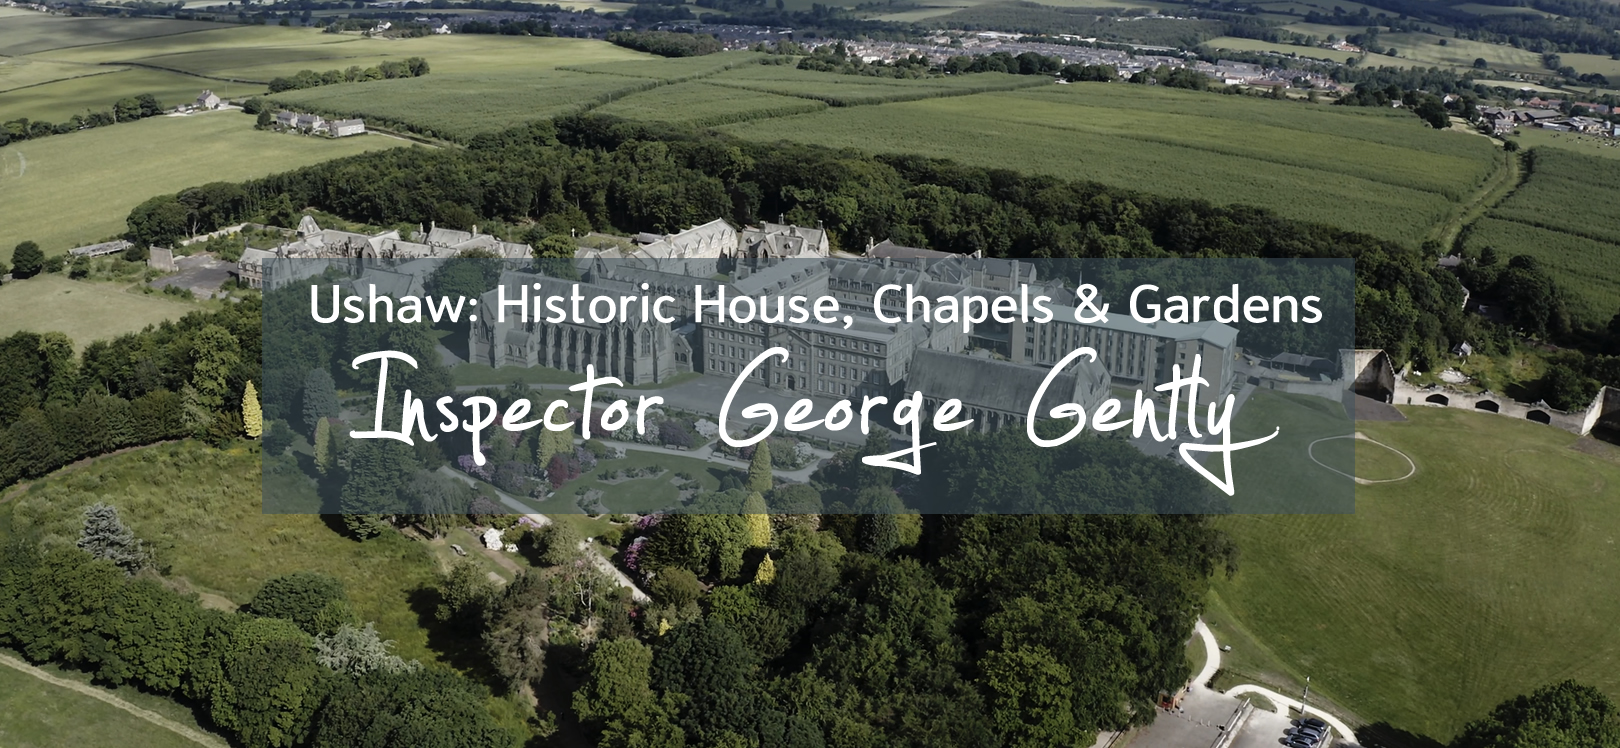 Ushaw: Historic House, Chapels & Gardens. Inspector George Gently